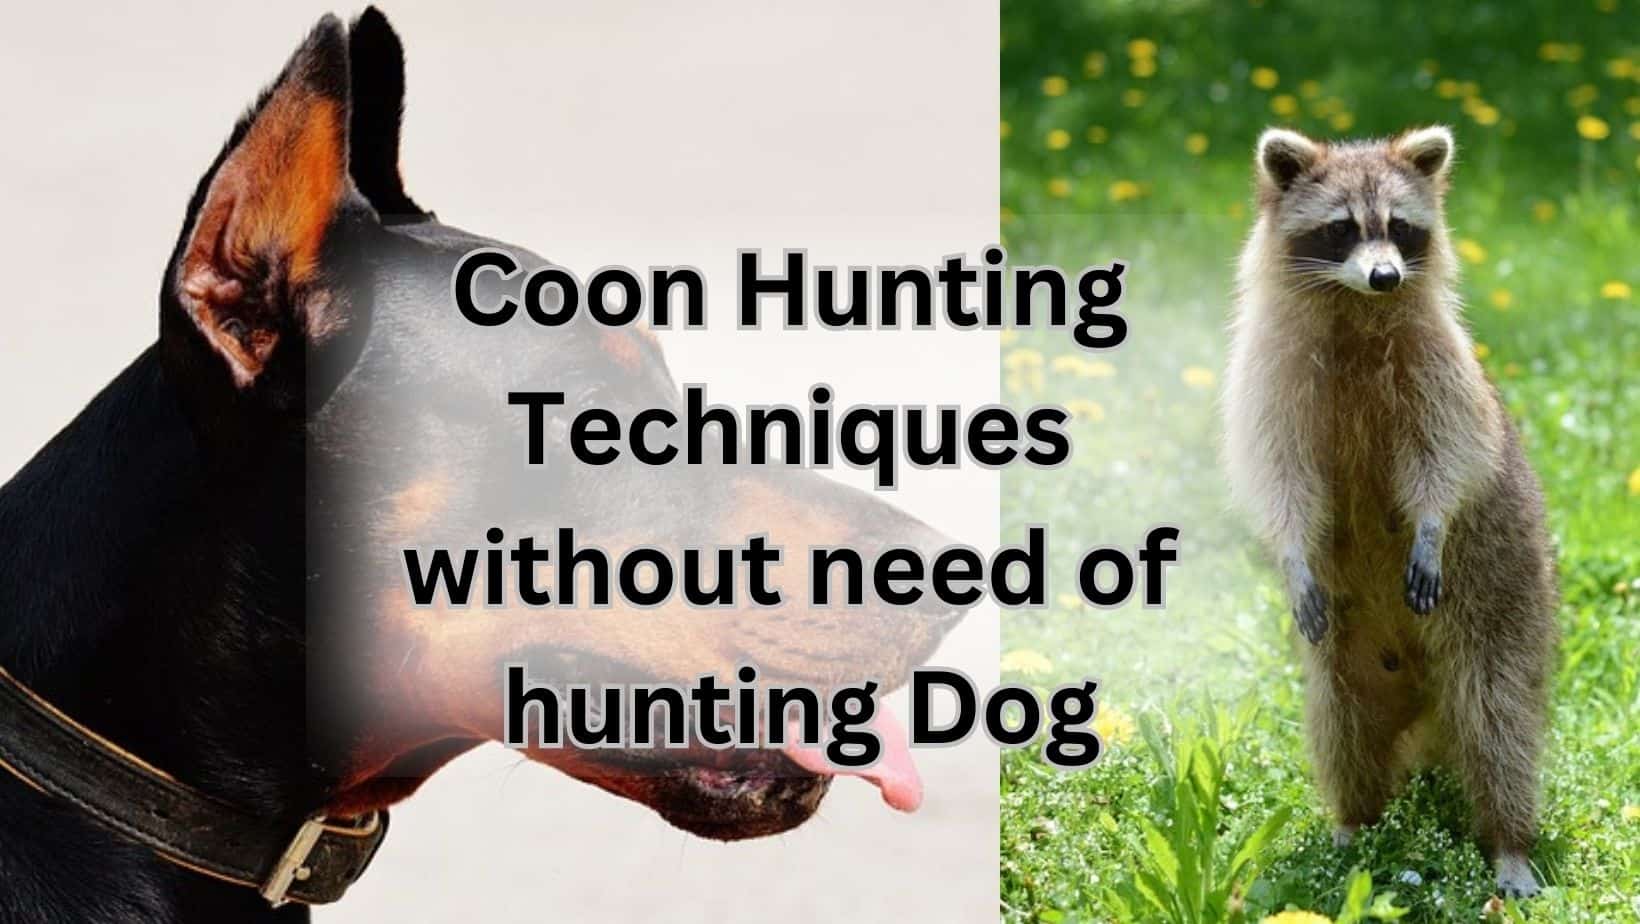 Coon hunting without dog